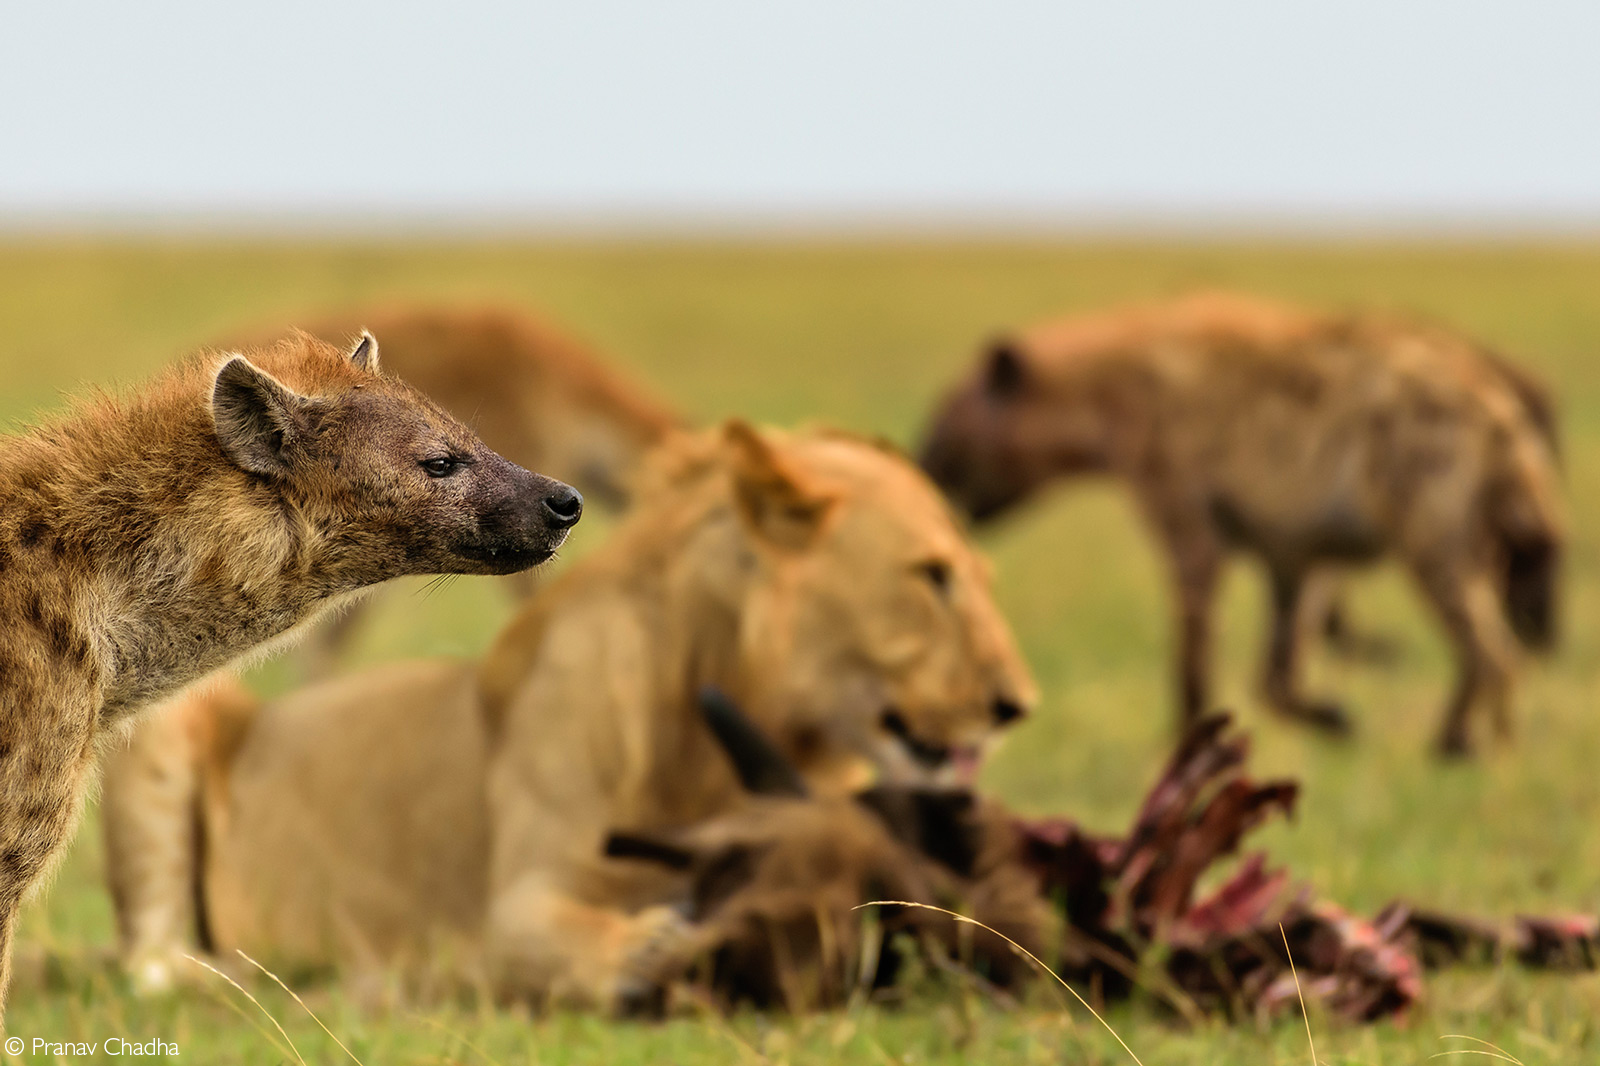 A sub-adult lion comes in to steal a kill made by spotted hyenas, Maasai Mara National Reserve, Kenya © Pranav Chadha